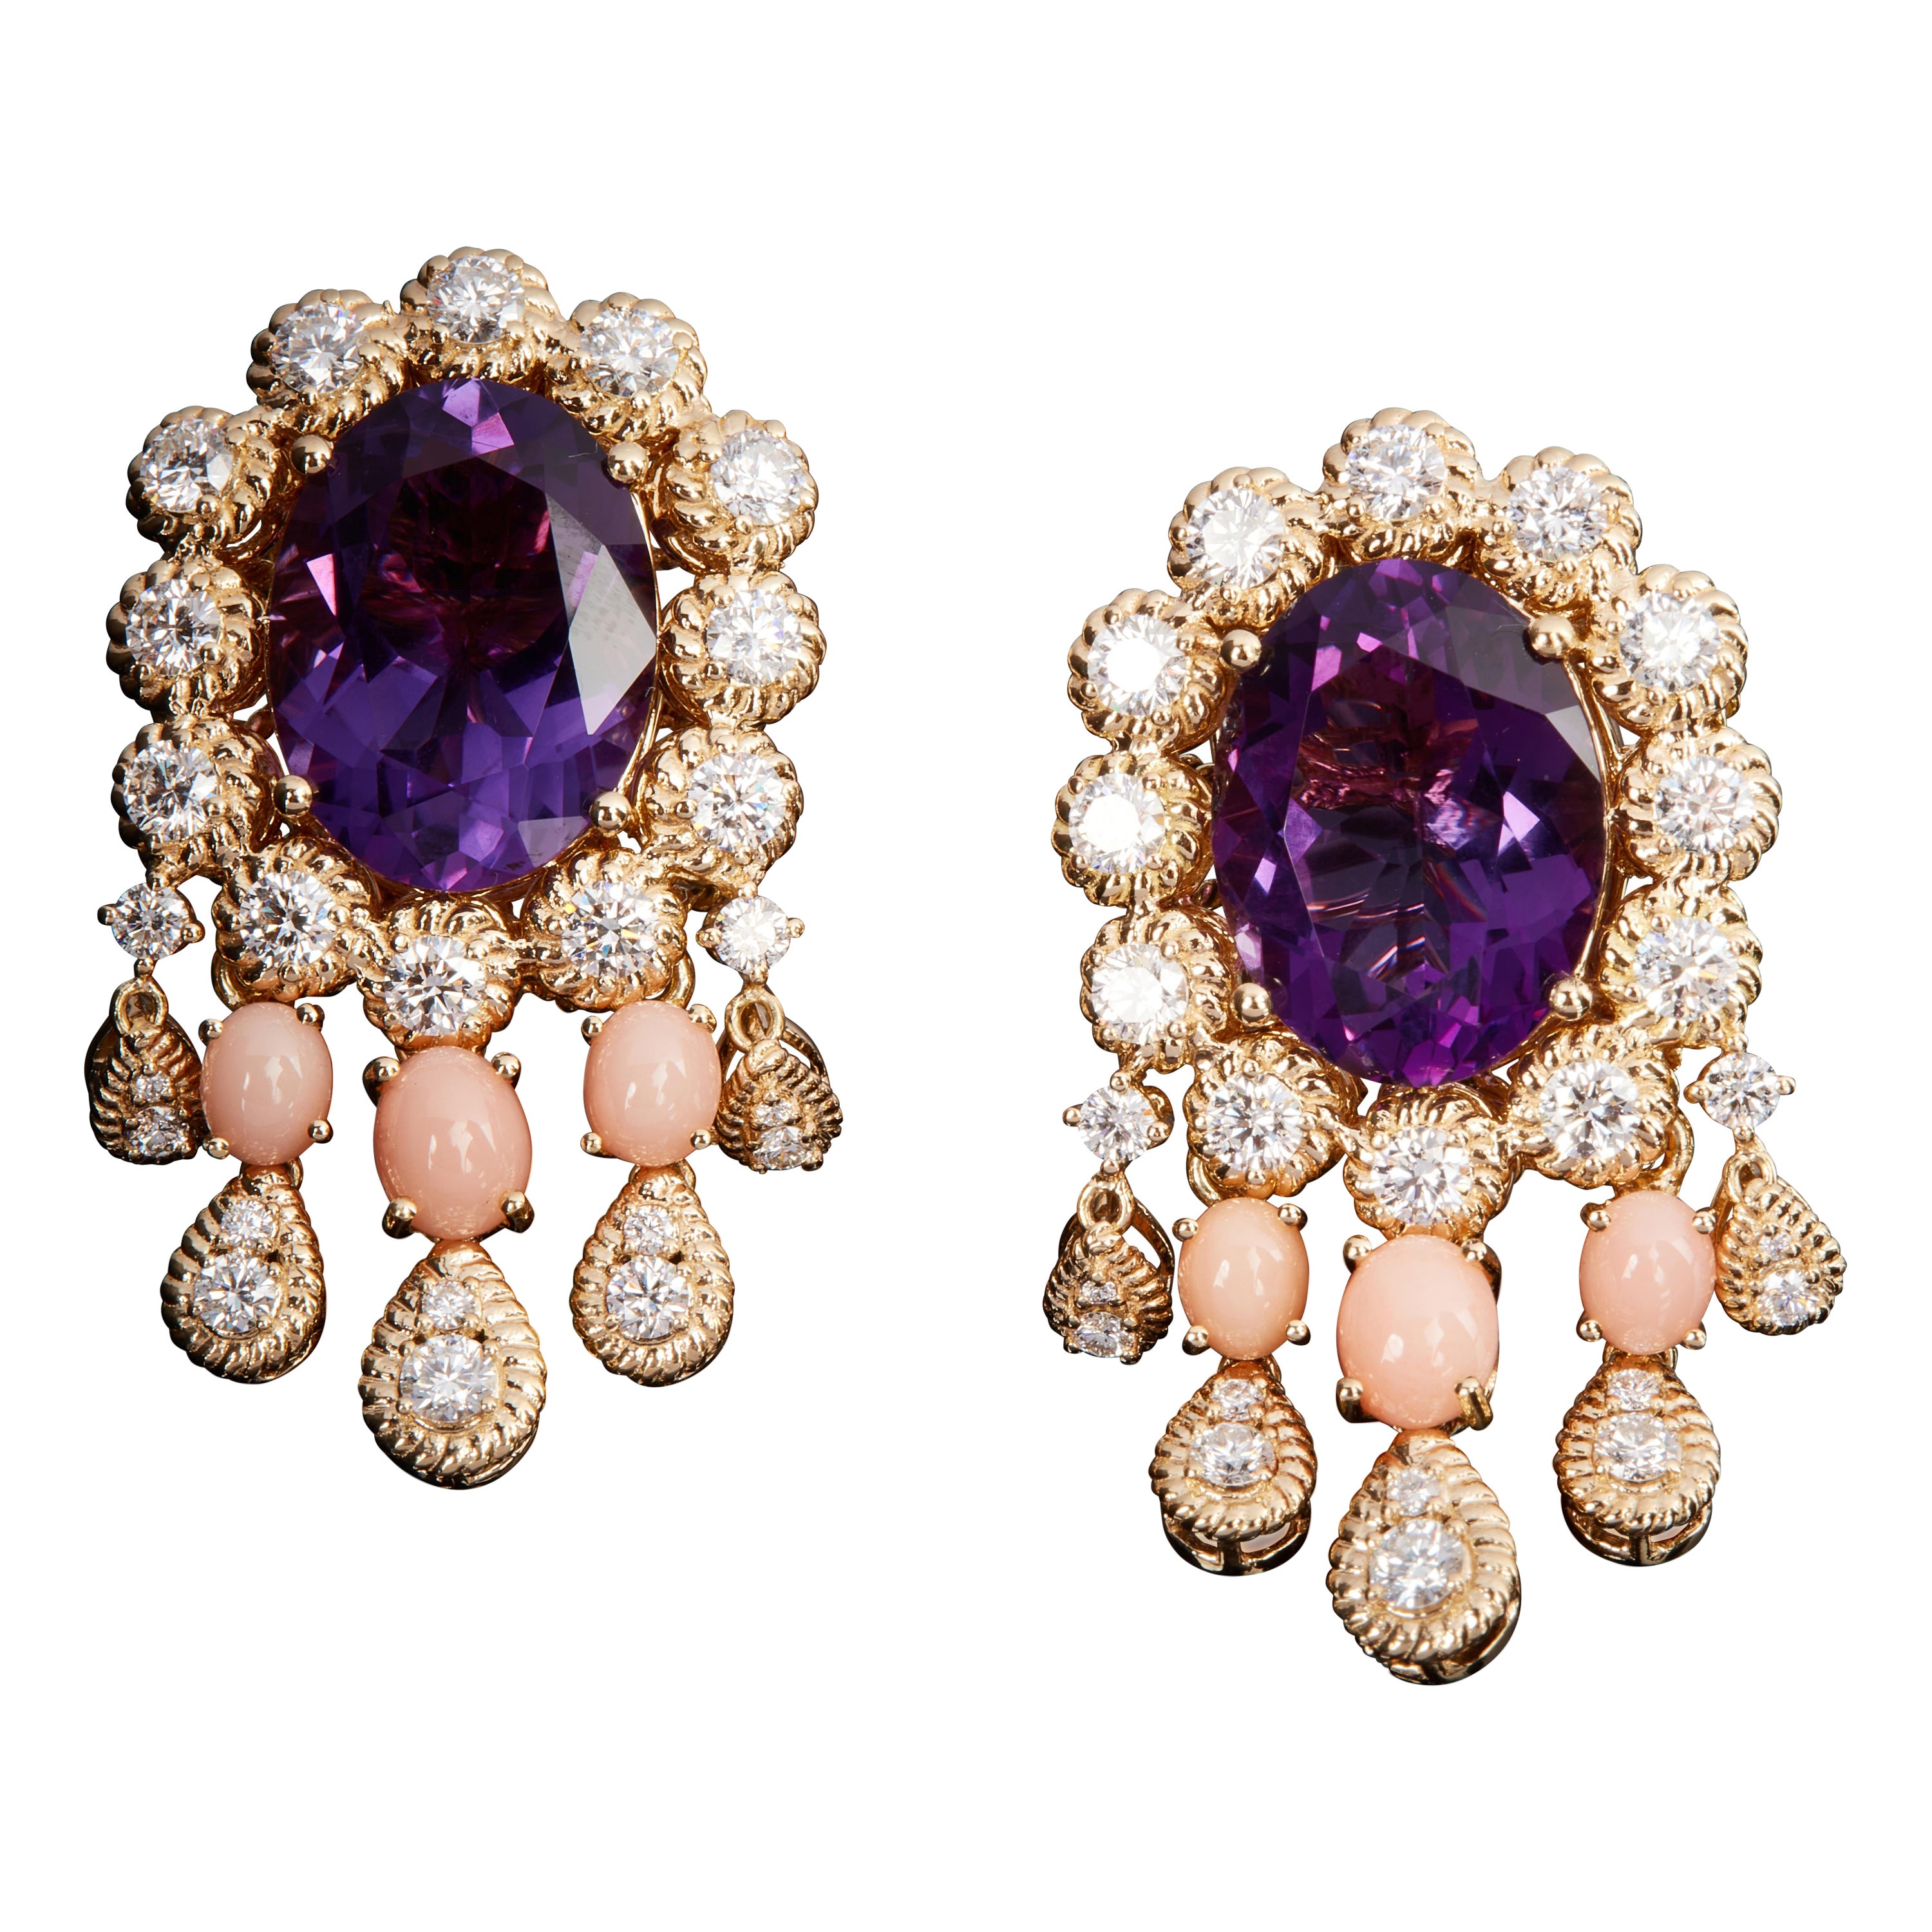 Veschetti 18 Kt Yellow Gold, Amethyst, Coral and Diamond Earrings For Sale